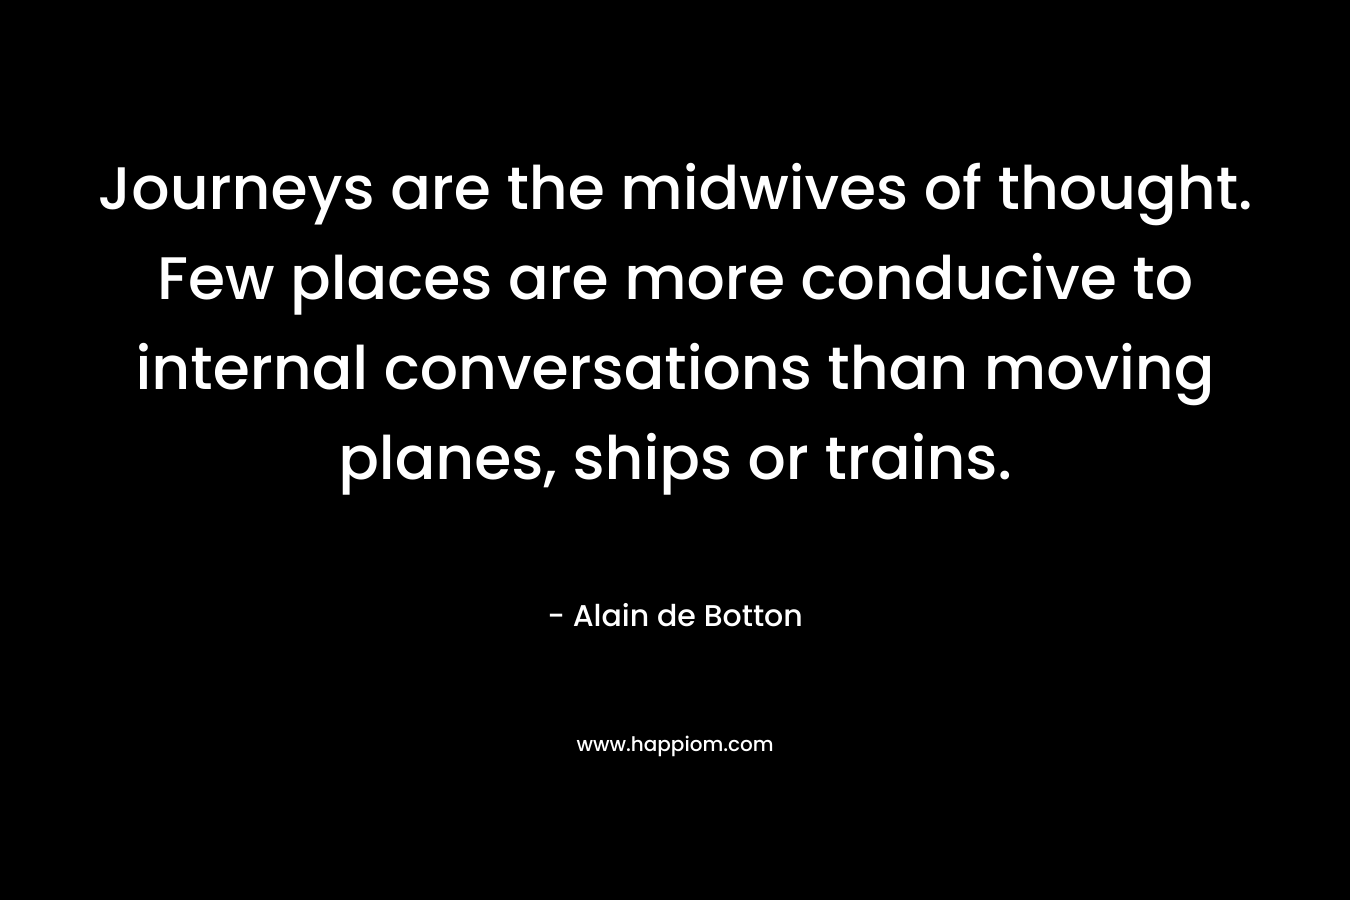 Journeys are the midwives of thought. Few places are more conducive to internal conversations than moving planes, ships or trains. – Alain de Botton